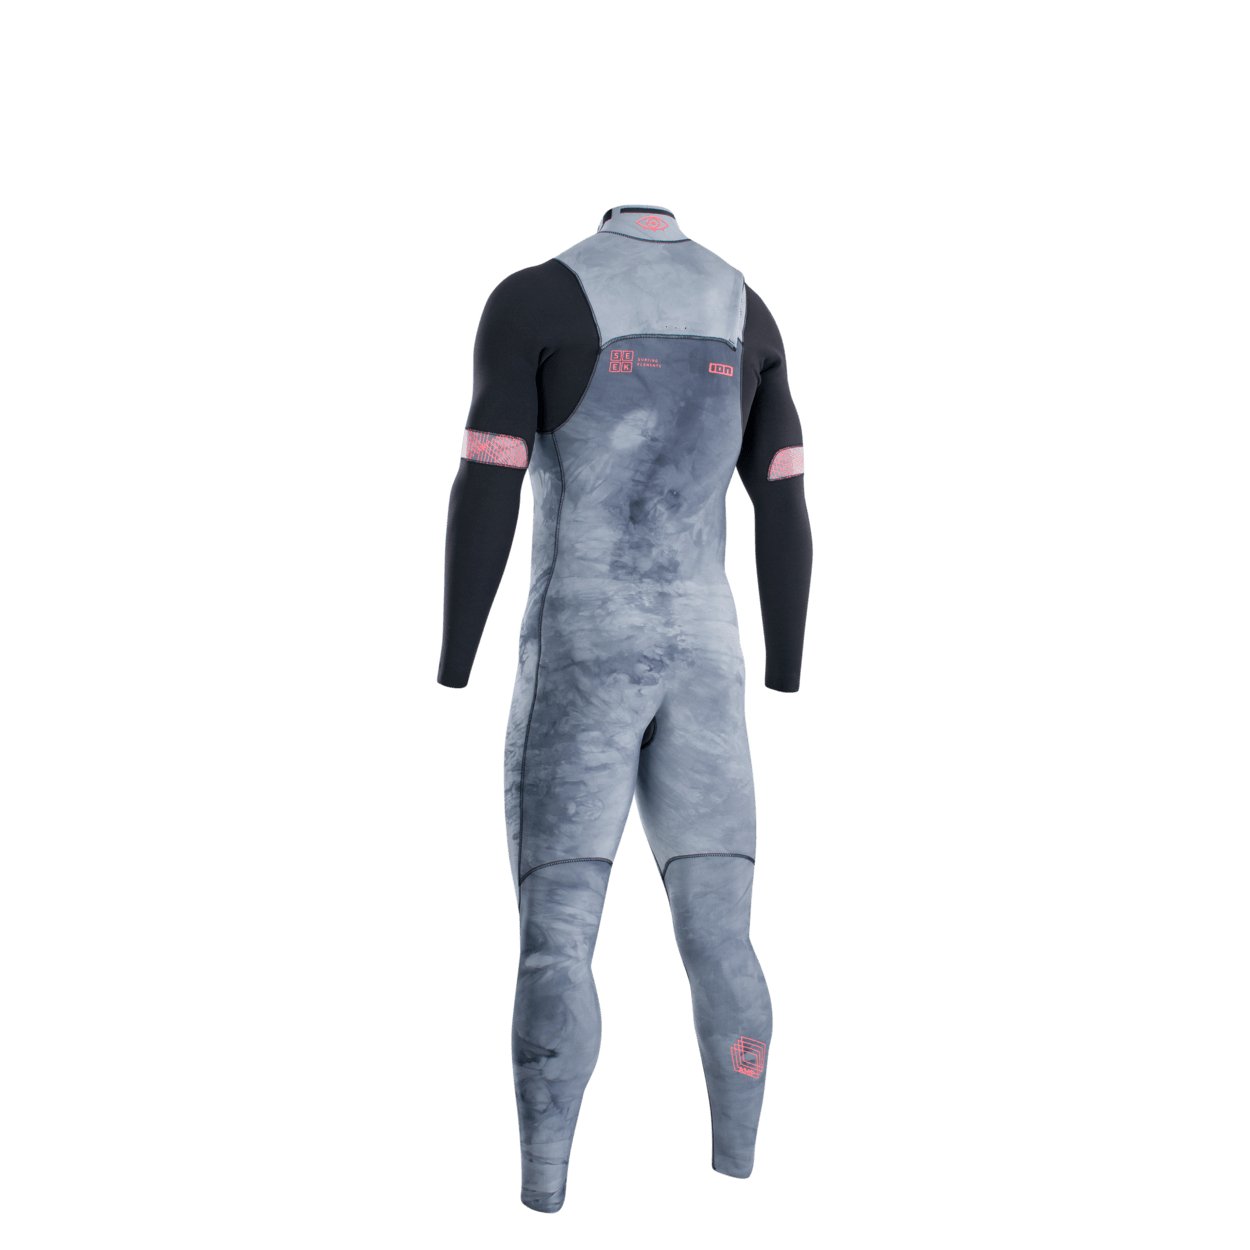 ION Seek Amp 4/3 Front Zip 2022 - Worthing Watersports - 9010583056272 - Wetsuits - ION Water